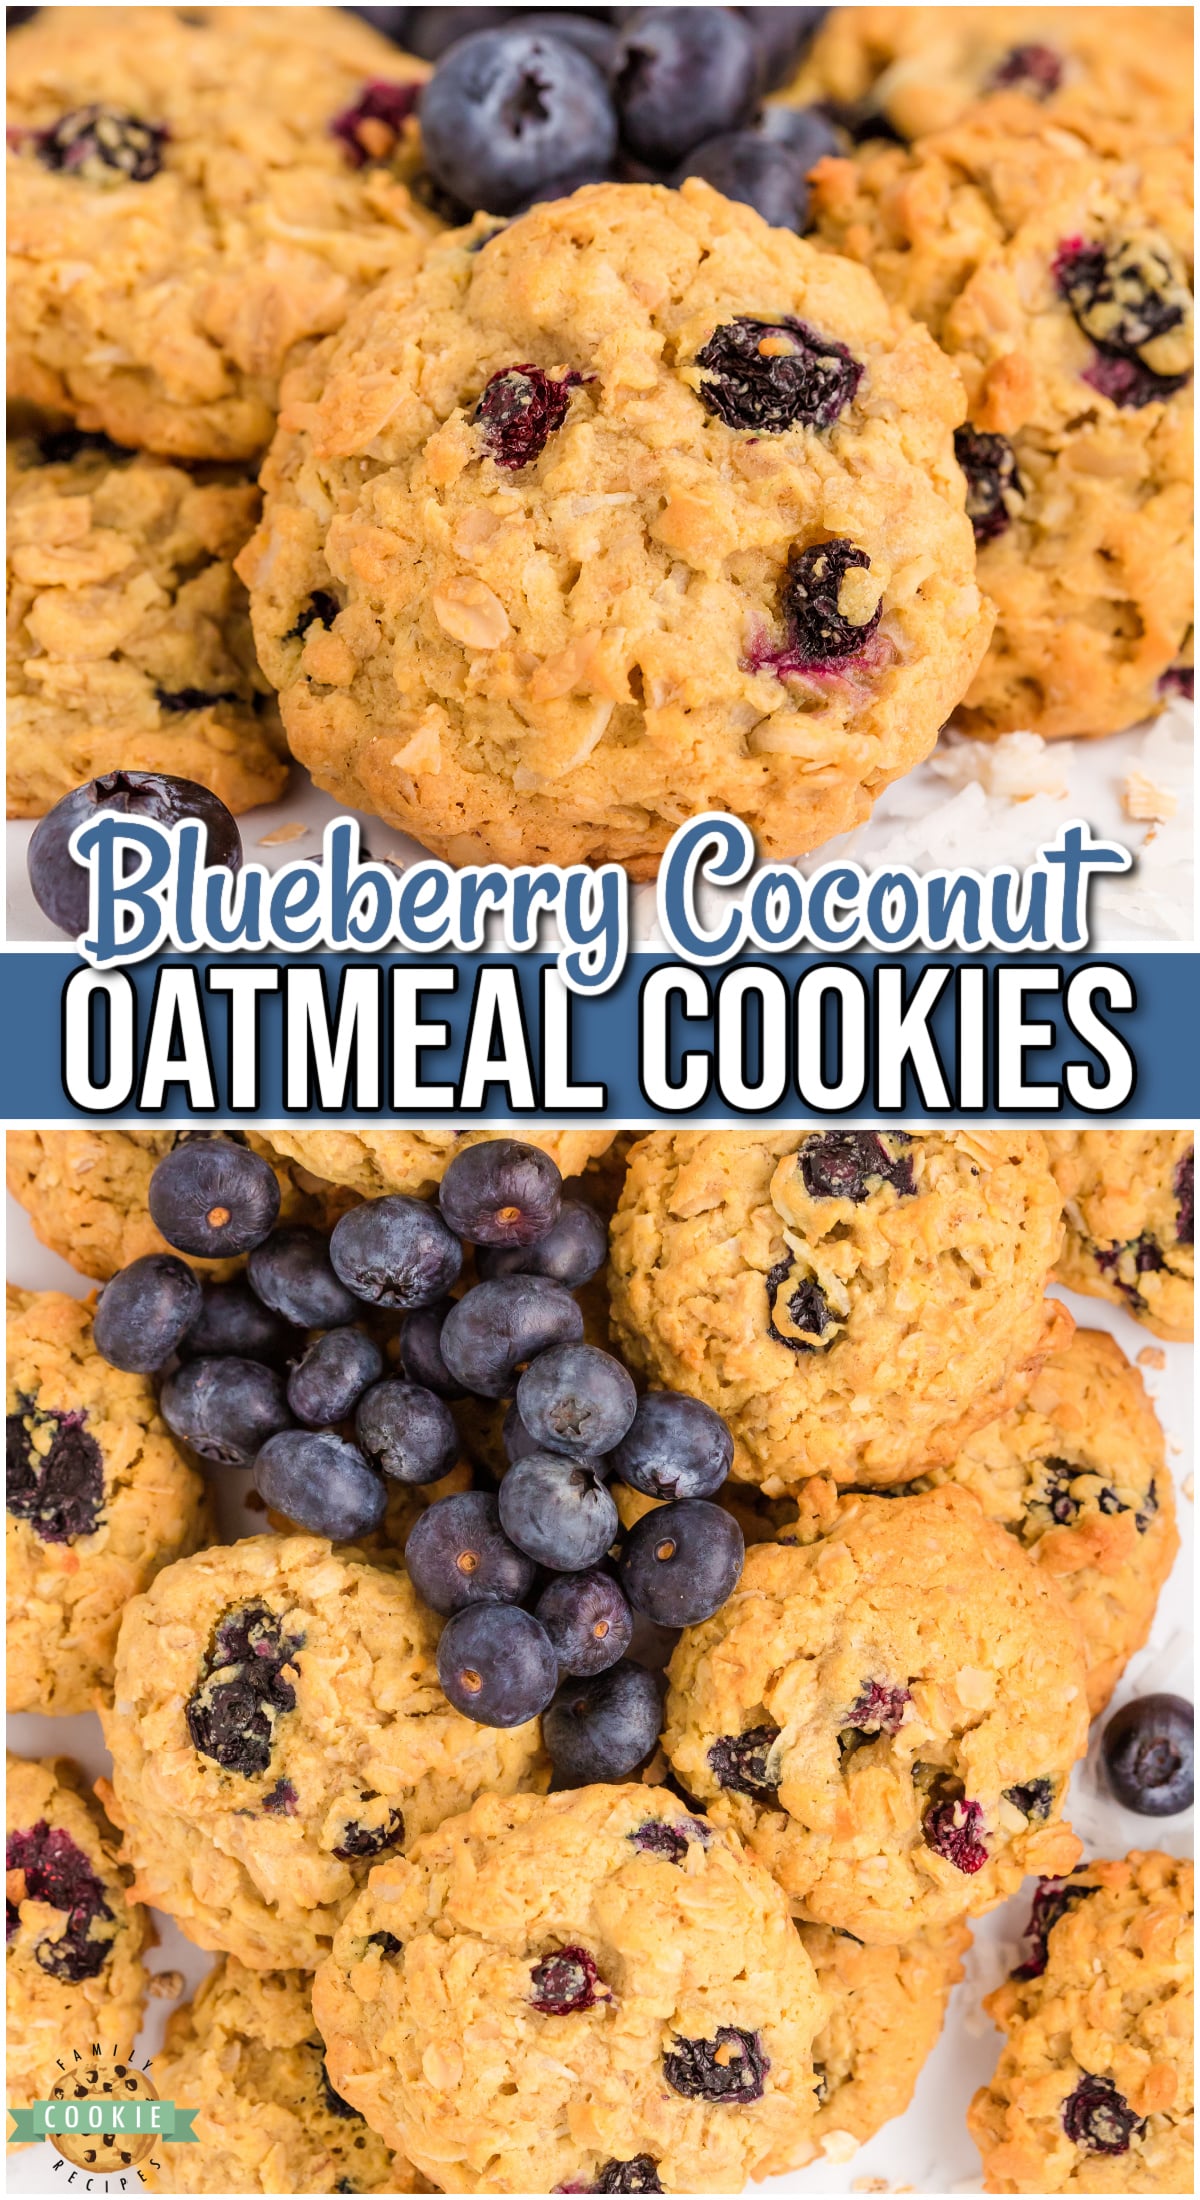 Blueberry Oatmeal Cookies are soft & chewy oatmeal cookies with lovely coconut & fresh blueberries! A delightful twist on oatmeal cookies!